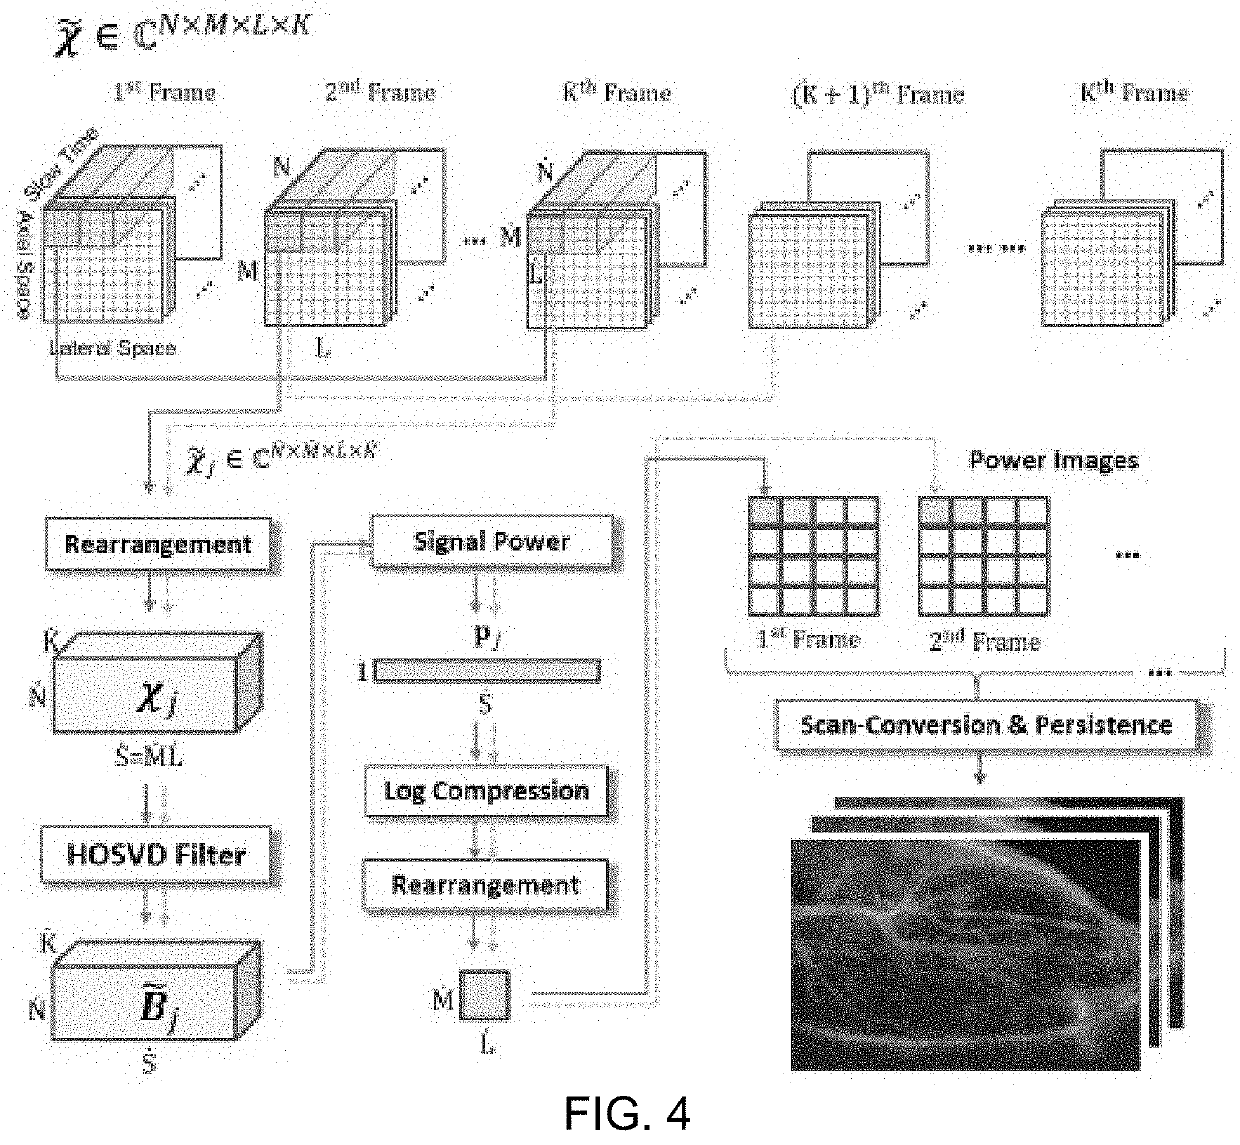 Ultrasonic imaging with clutter filtering for perfusion